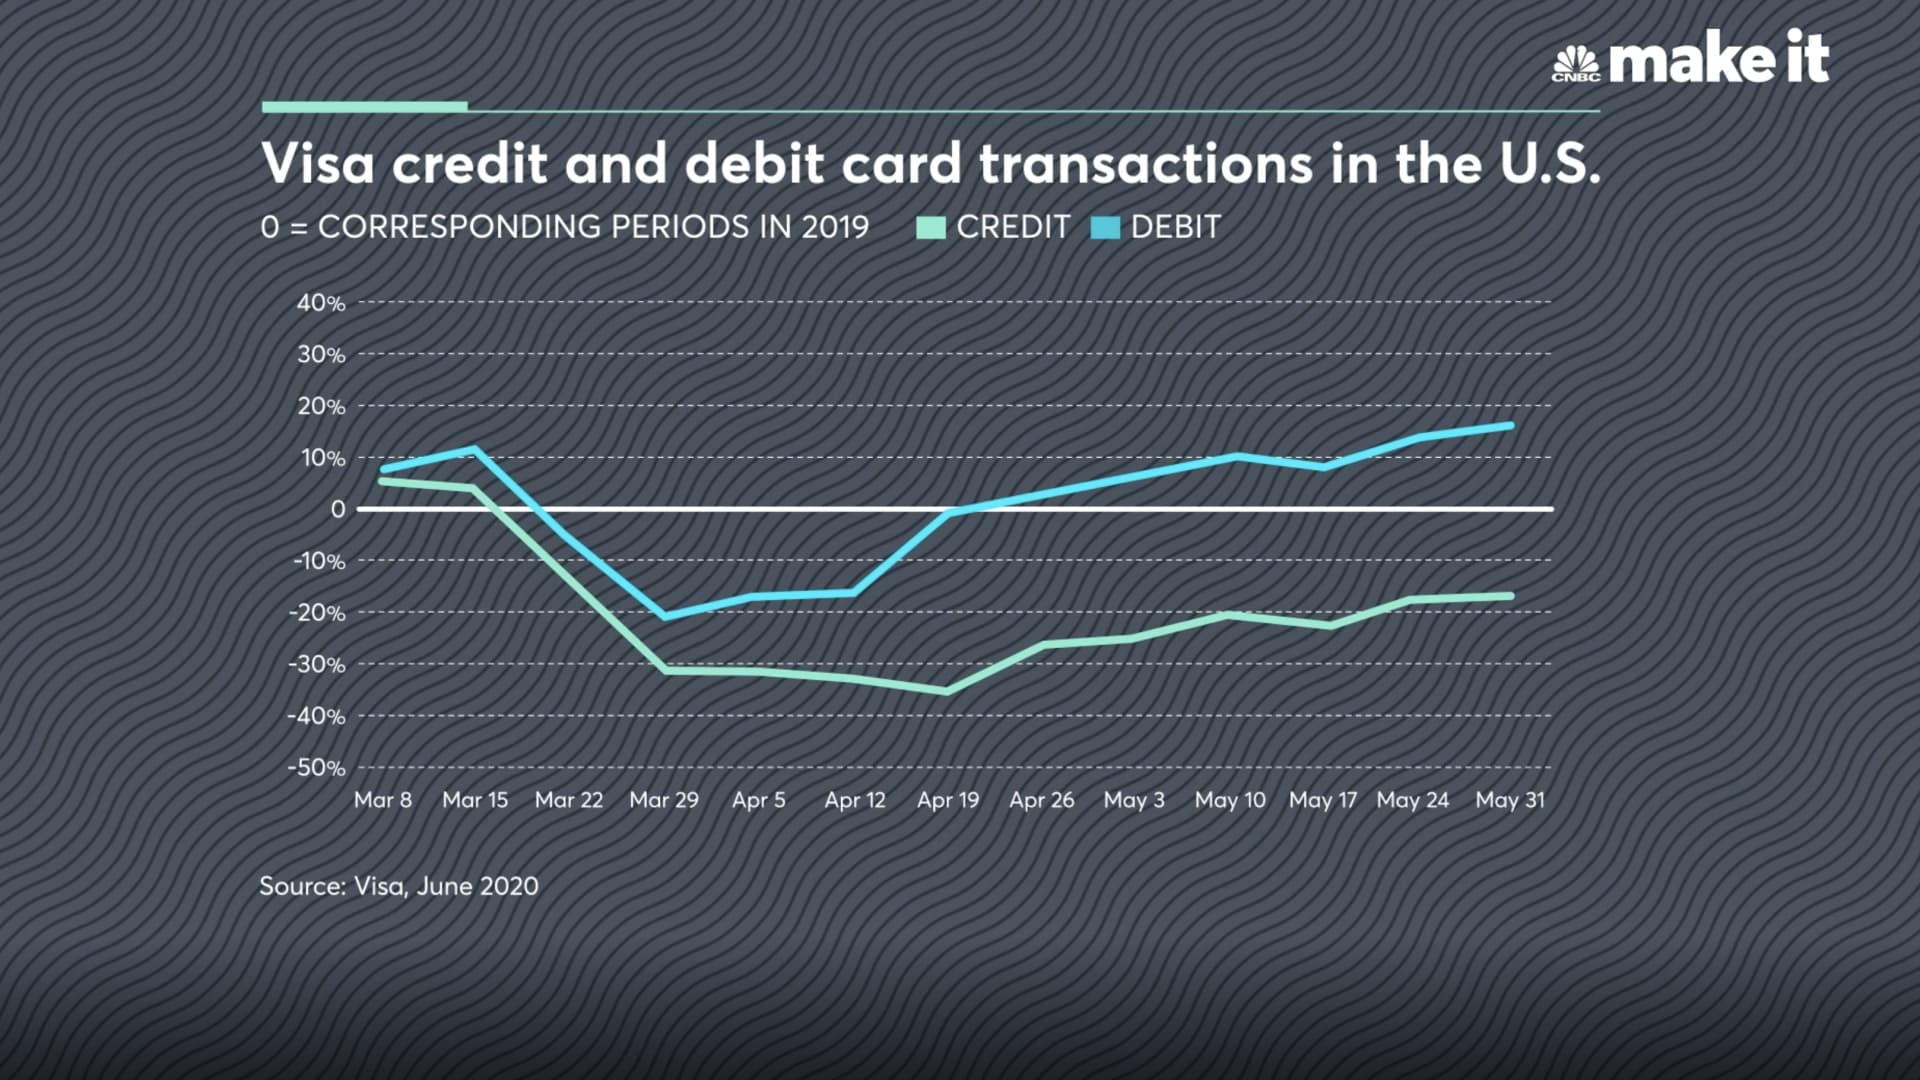 Visa credit and debit card transactions in the U.S. in March to May 2020.